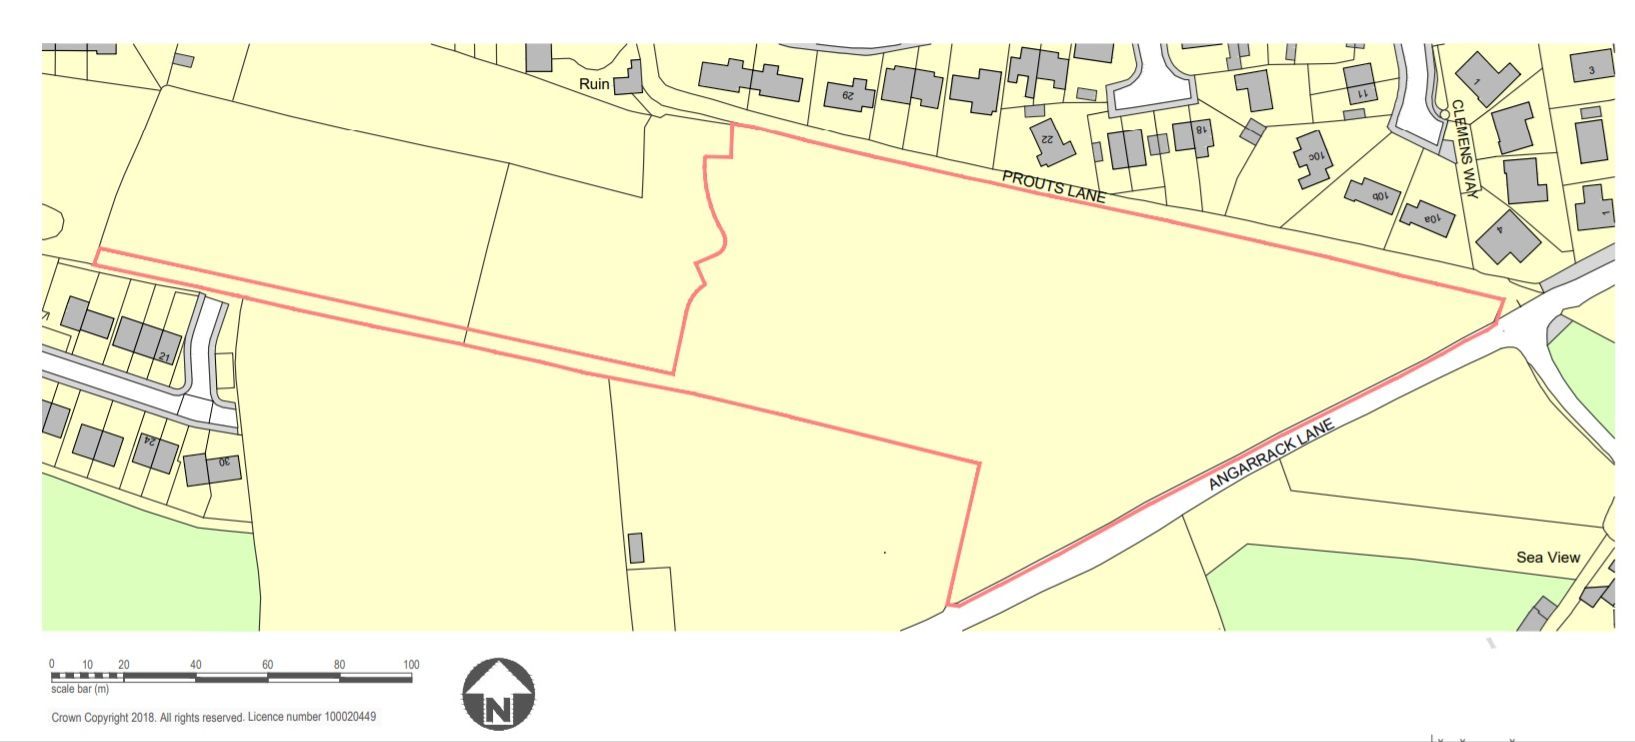 A map of the site in the planning documents